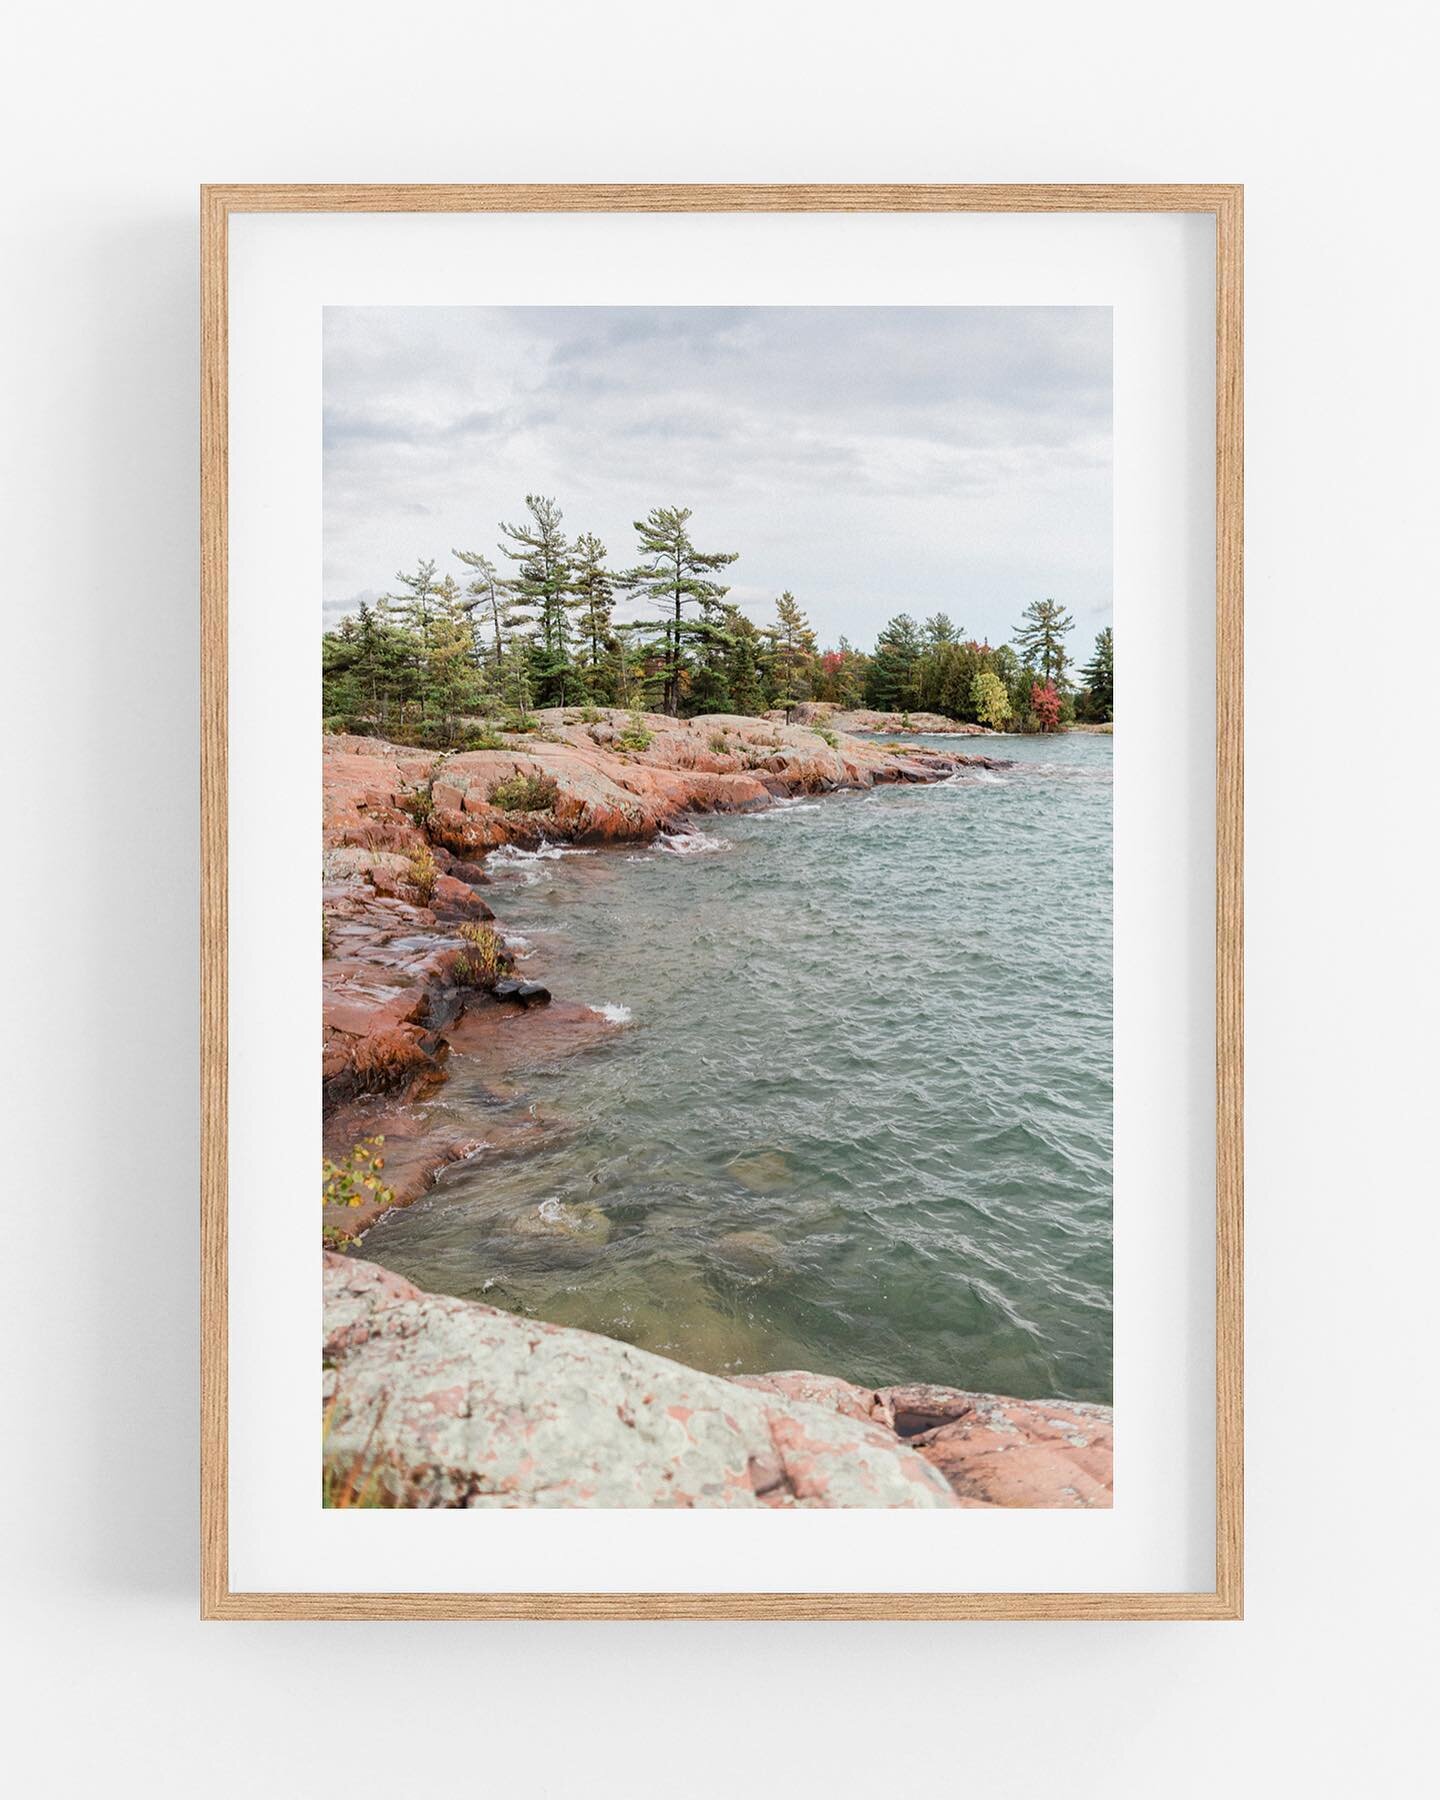 Swipe to hang 👉
.
It&rsquo;s almost this magically easy when your prints arrive framed up and ready to hang!
.
#collingwood #collingwoodontario #collingwoodphotographer #collingwoodart #collingwoodartist #bmfafoundationarts #killarneyprovincialpark 